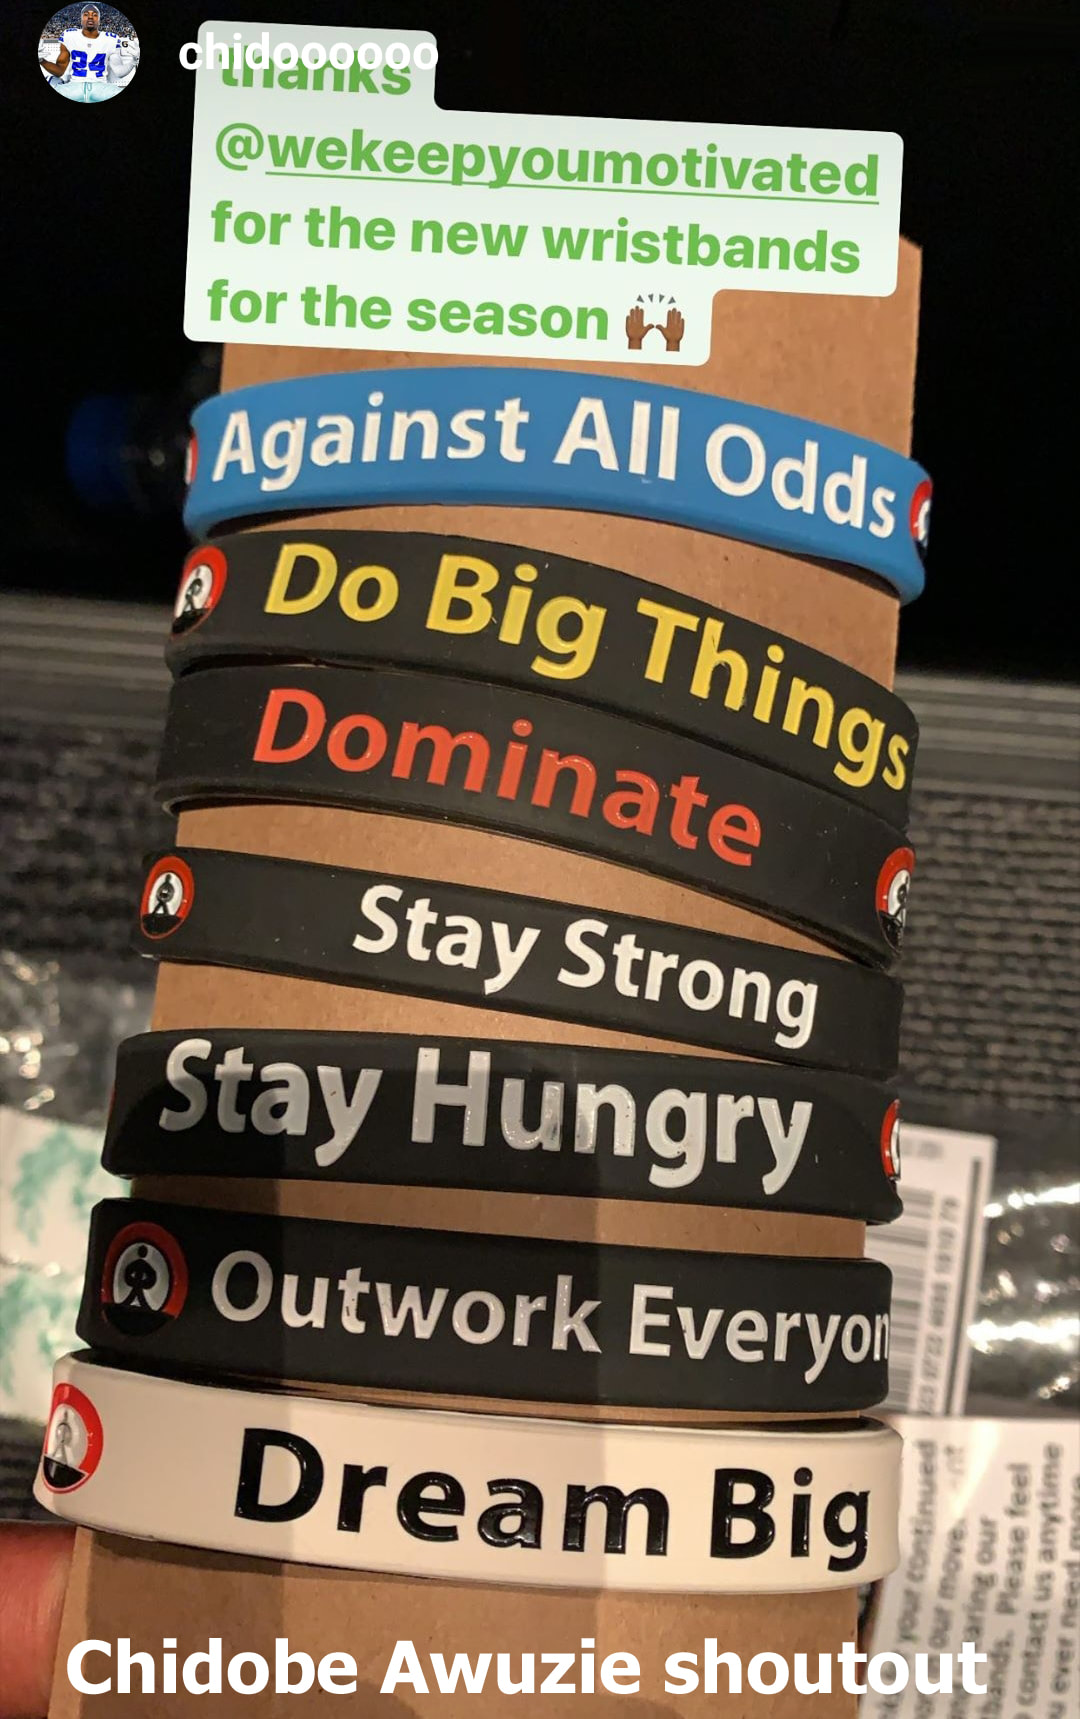 Daily Reminder Motivational Wristbands - Believe in Fairytales